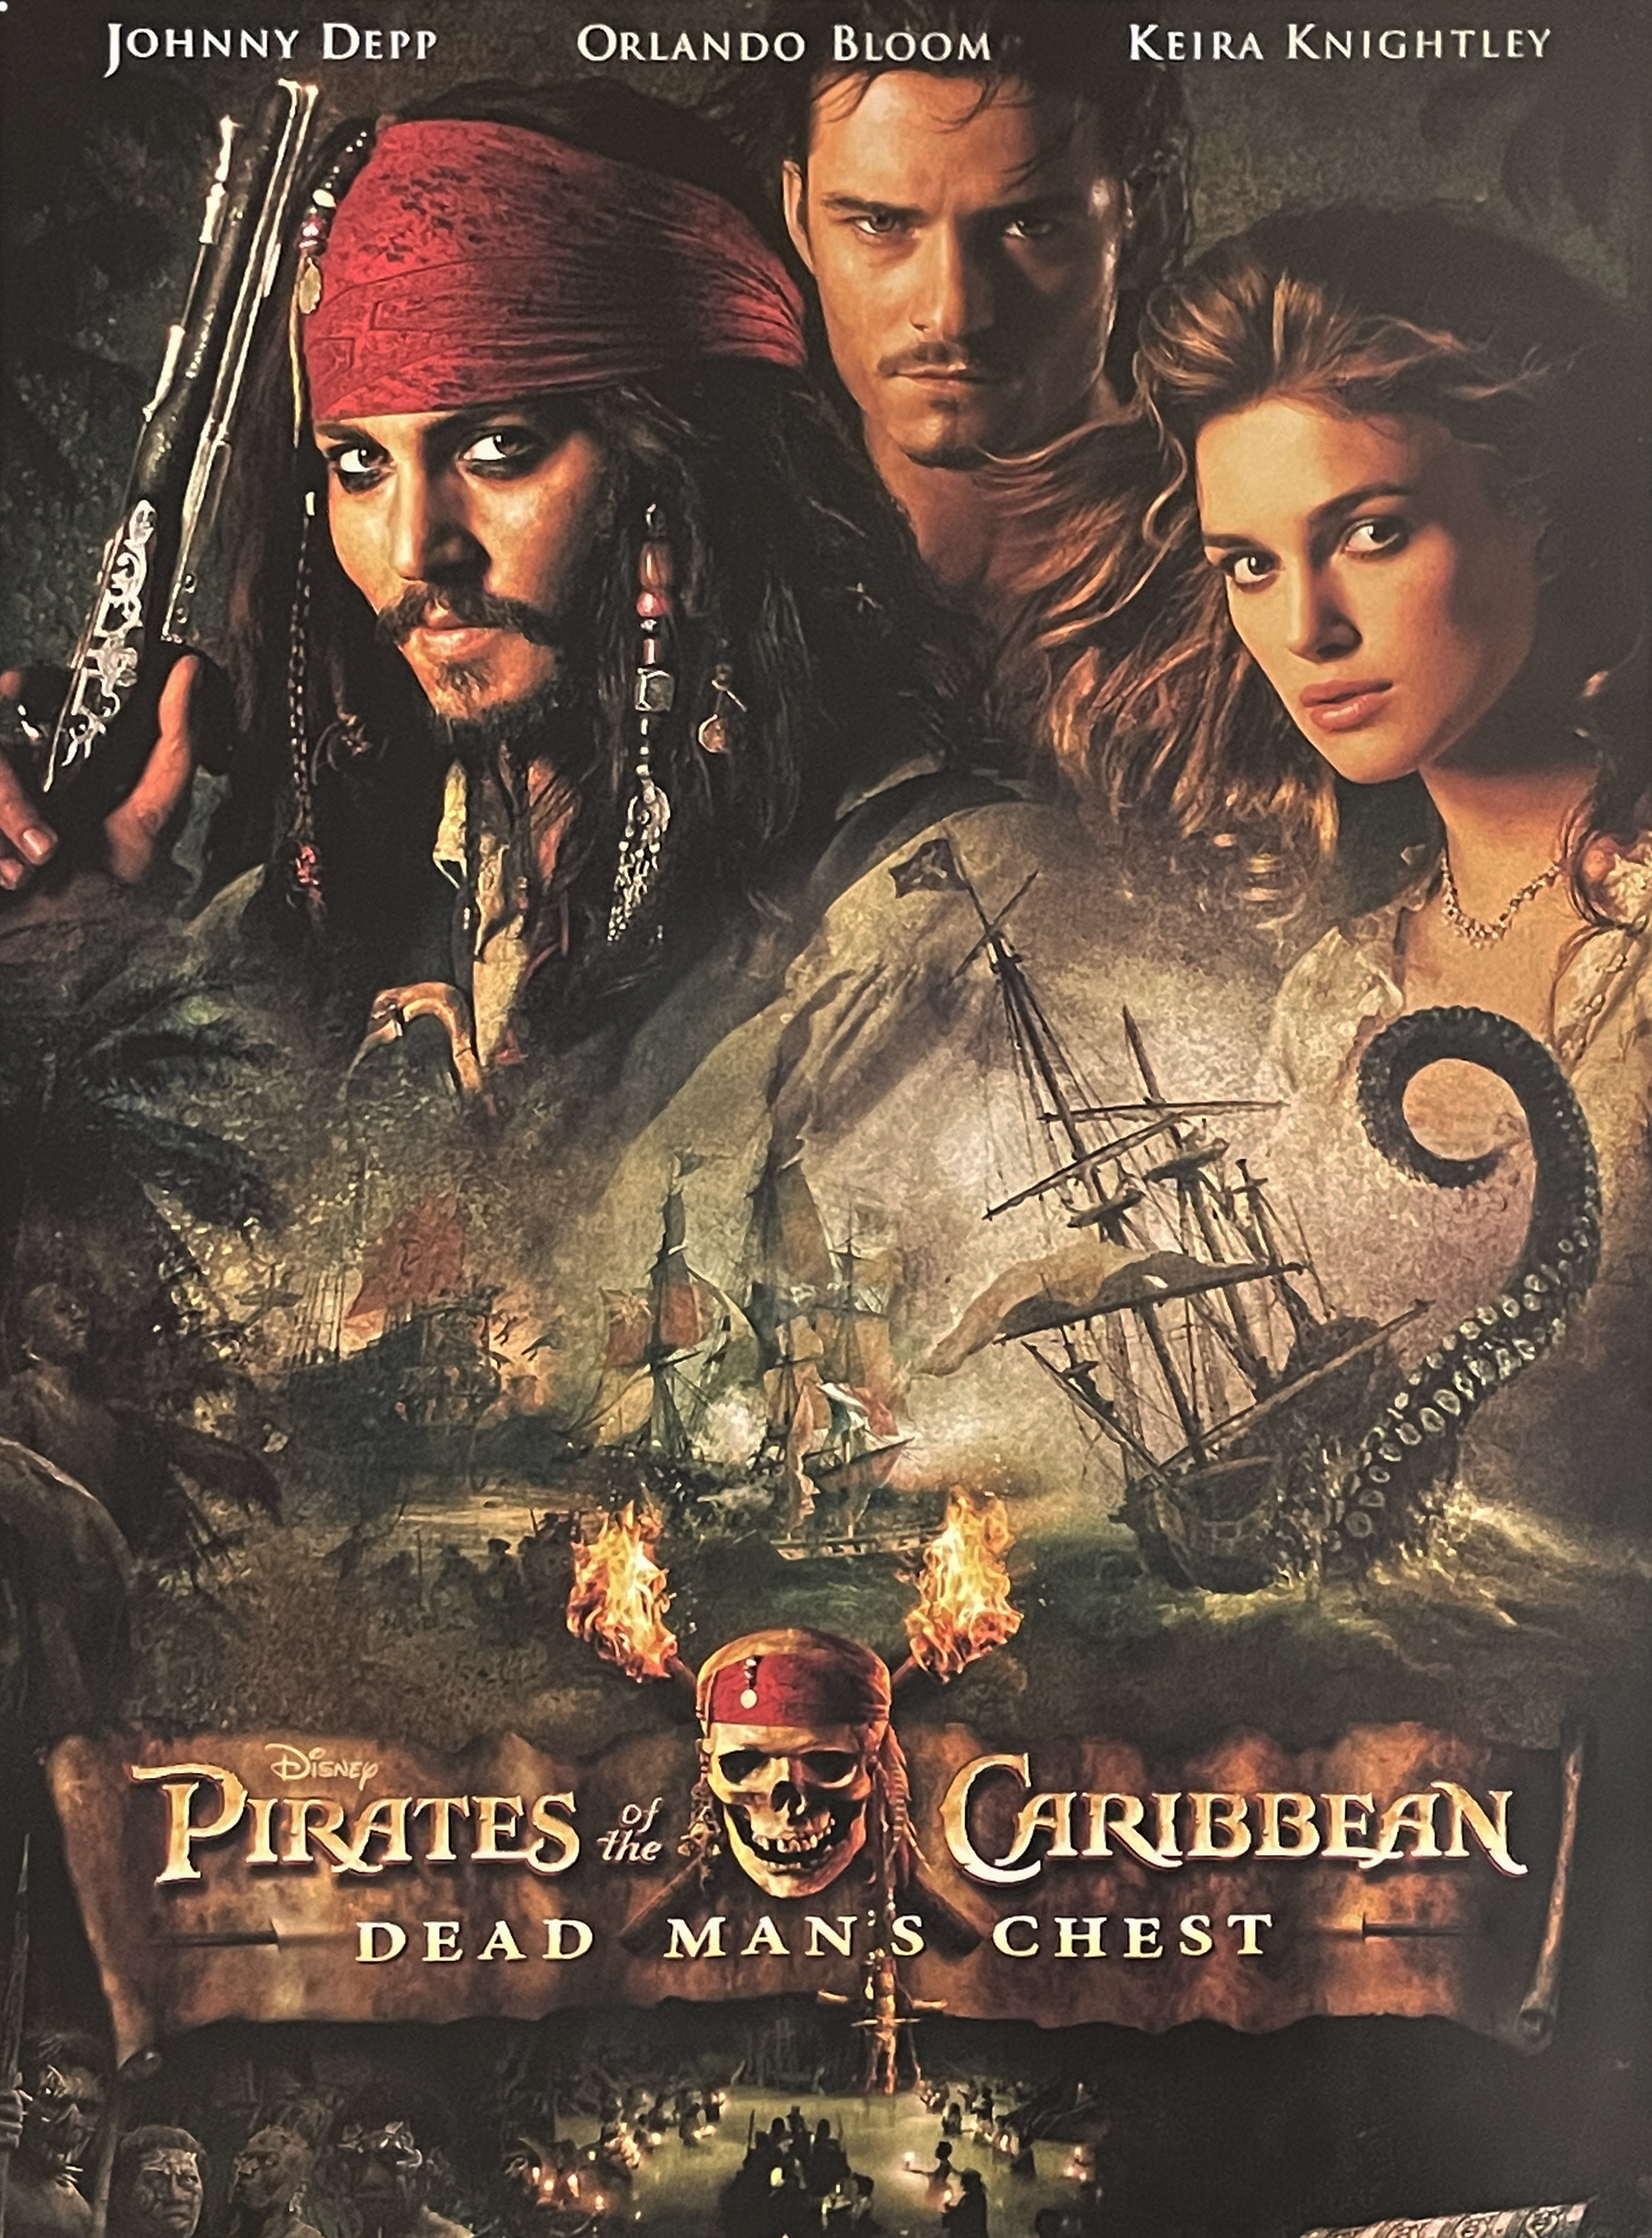 Pirates of the Caribbean - Dead Man's Chest - Cast